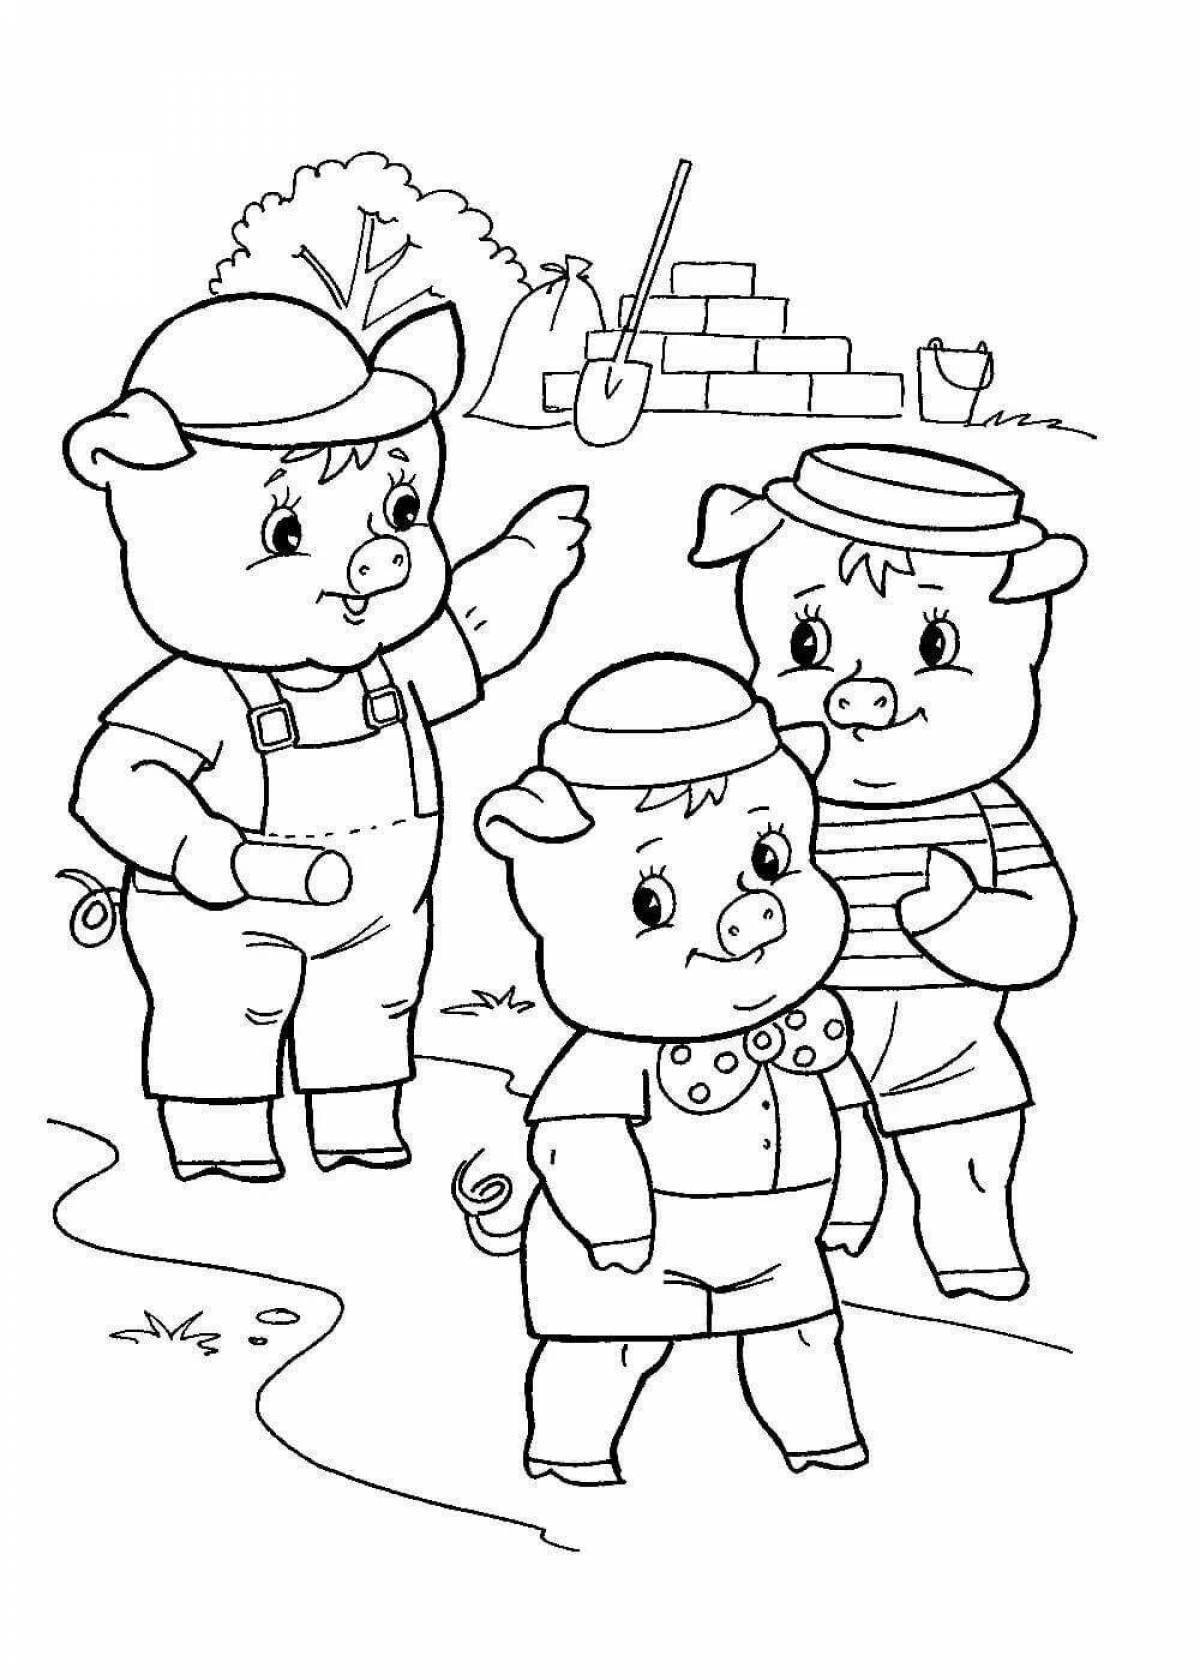 Joyful February coloring pages for kids